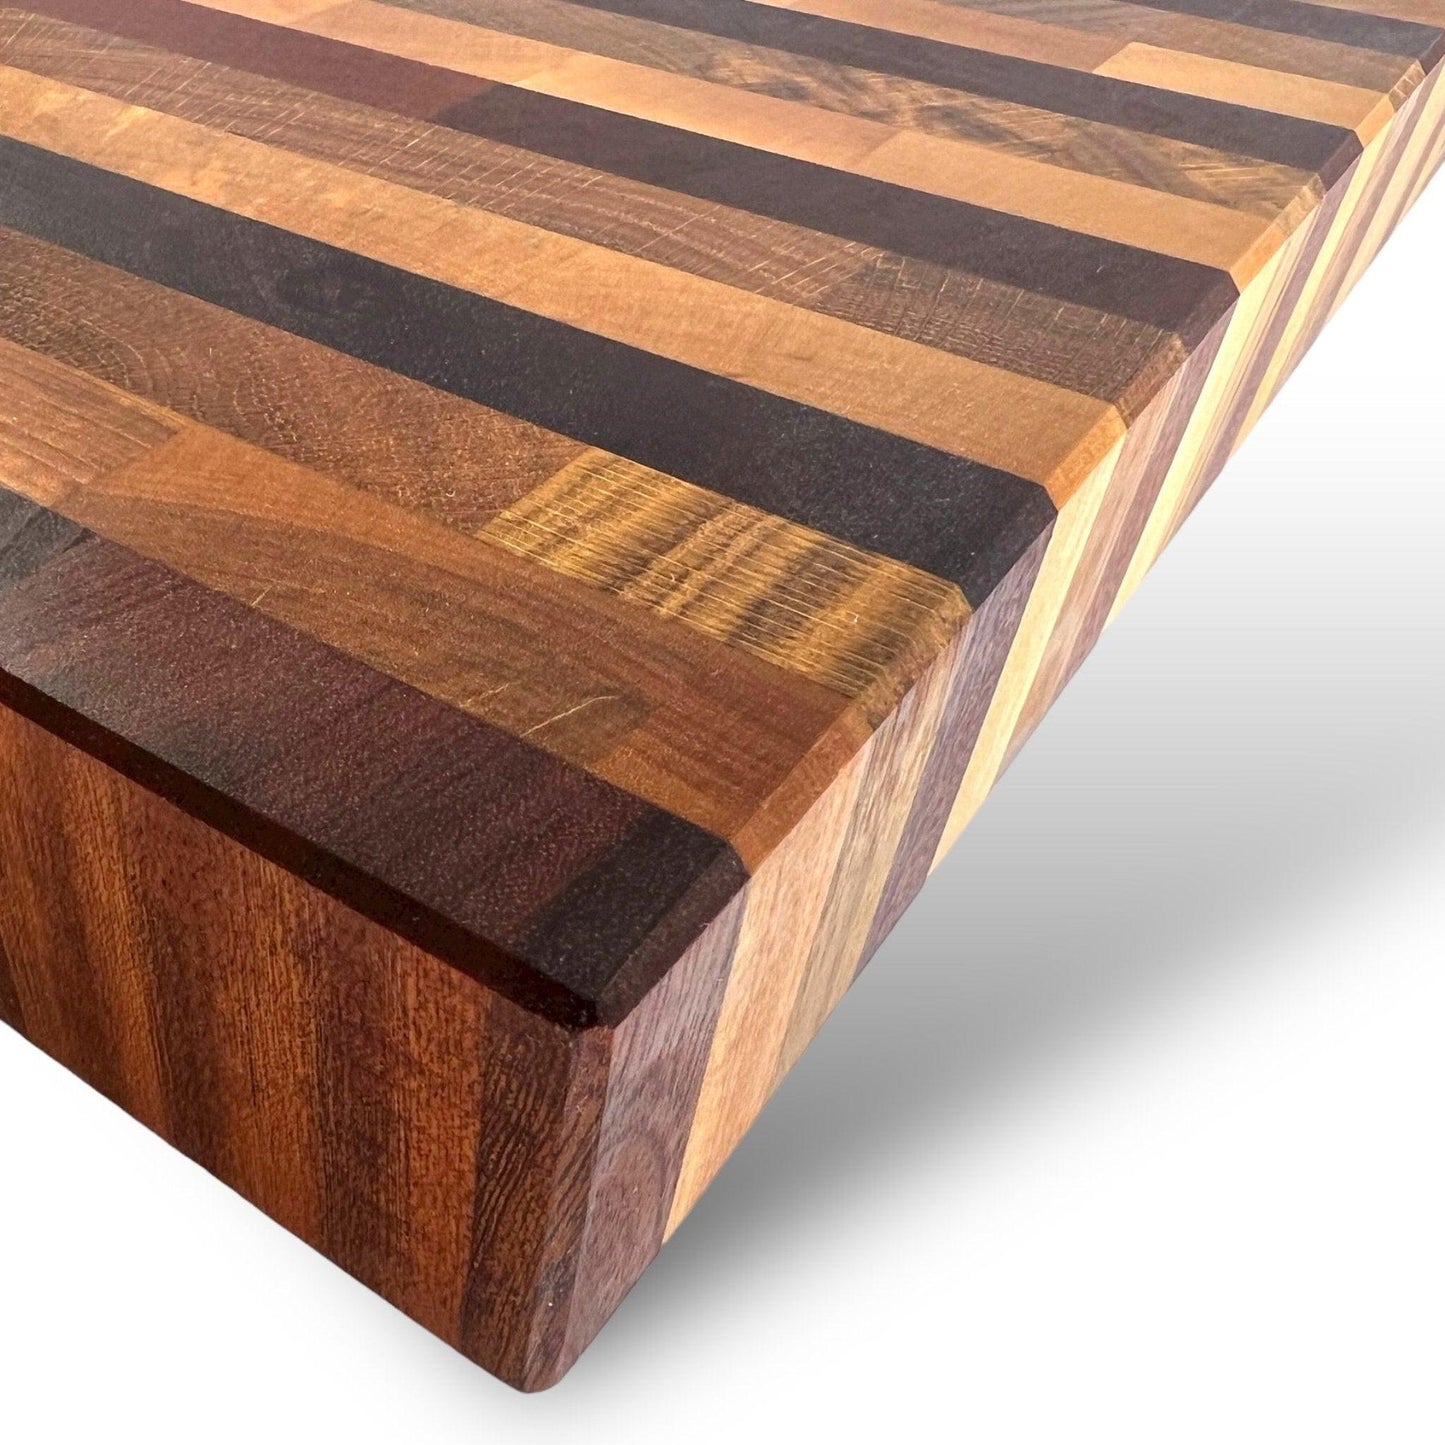 Rectangular mixed standing wood cutting board with 2'' pattern - BOISWOOD